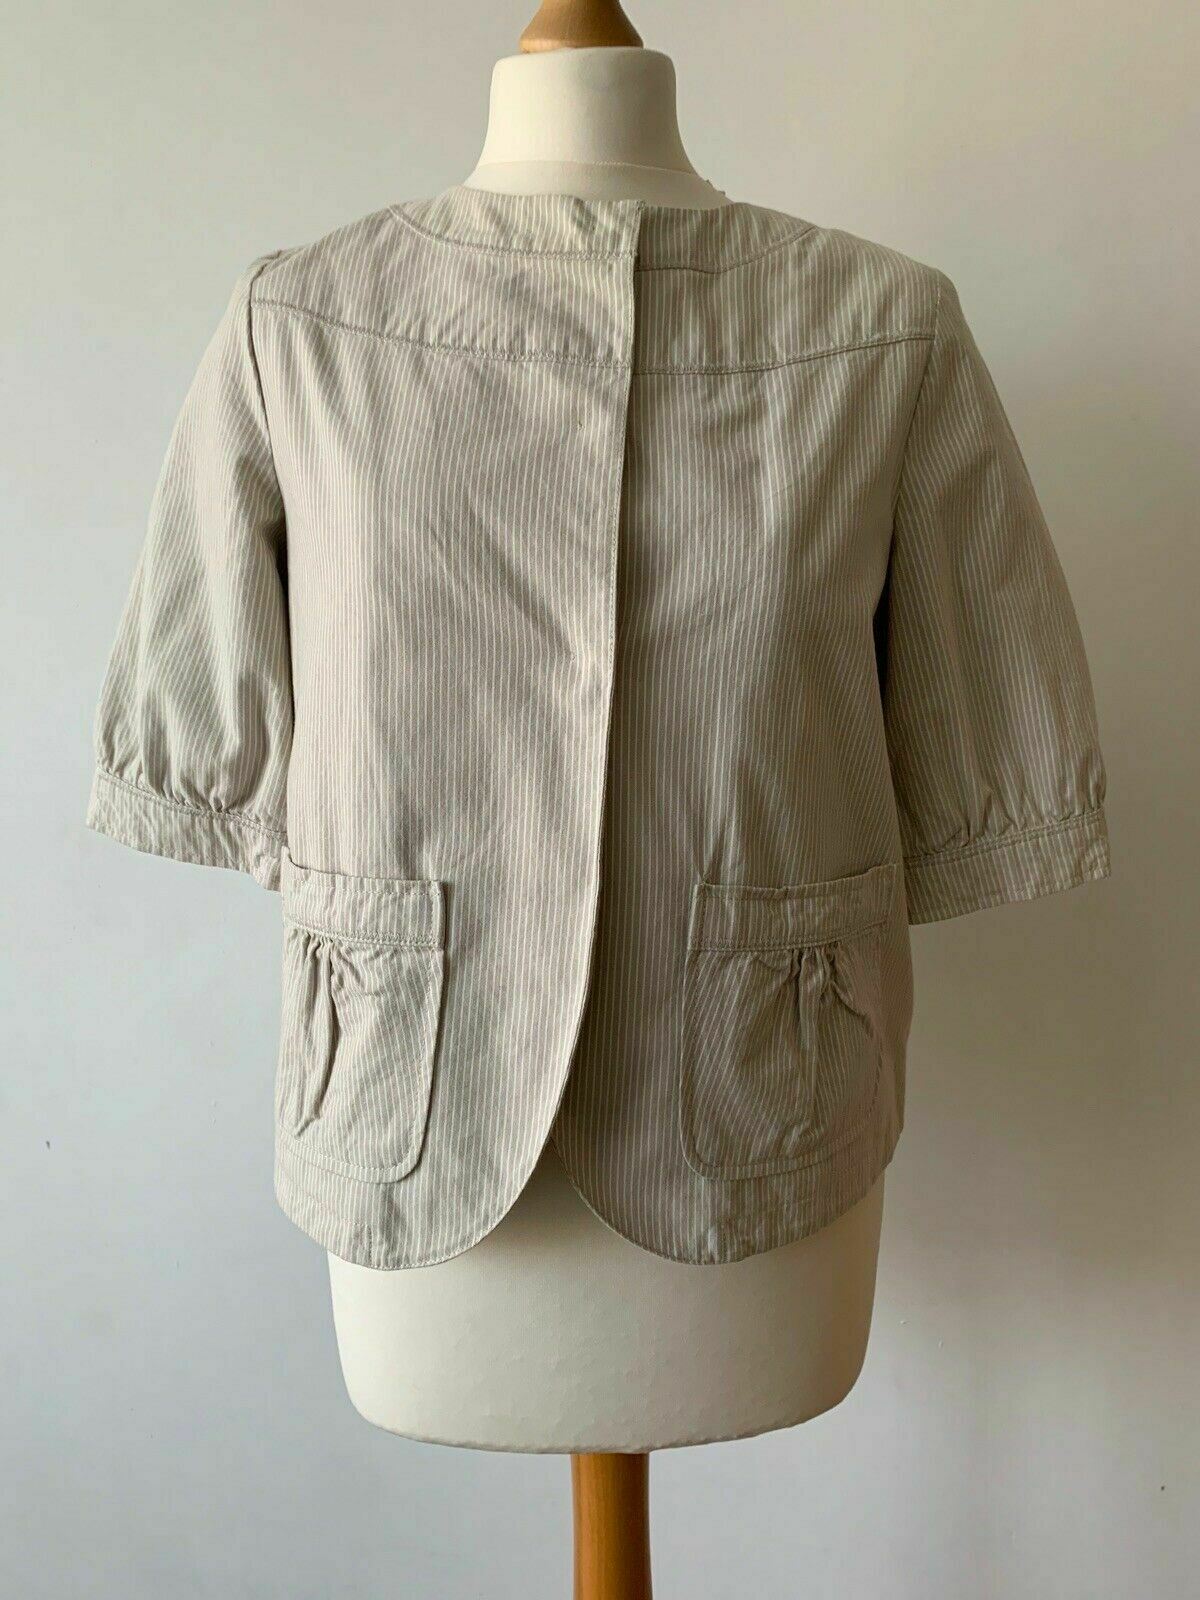 M&S Spring Jacket Size 12 Beige 3/4 Sleeves Pockets Striped Collarless